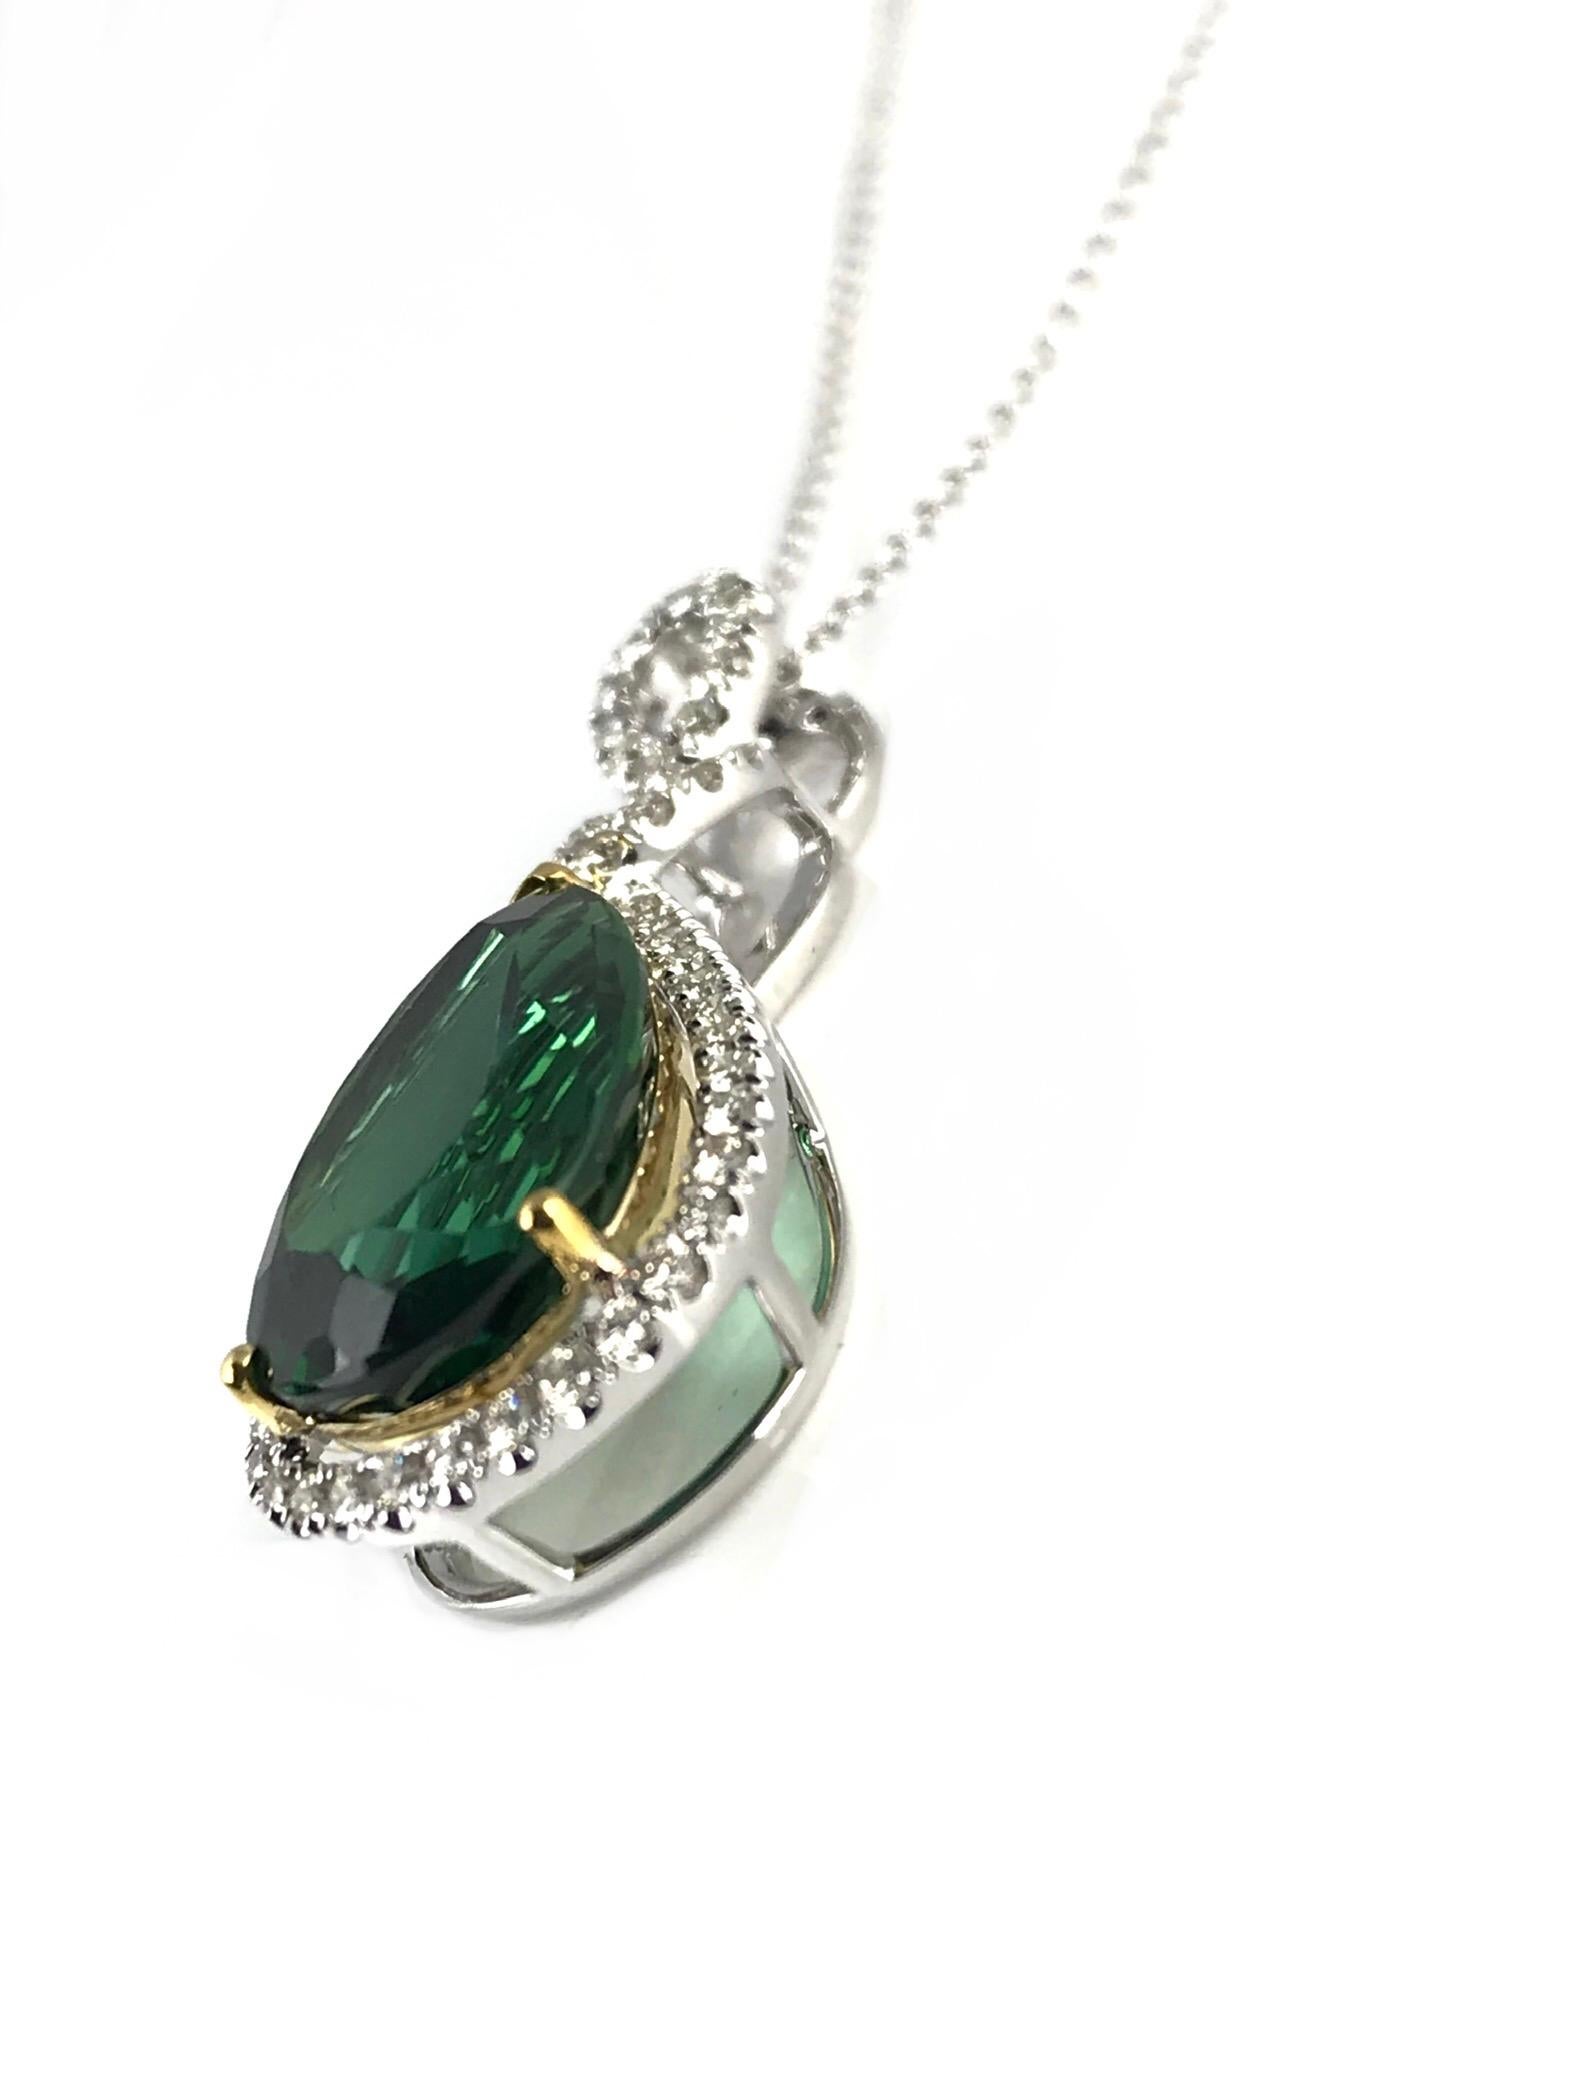 This elegant  pendant features a 5.50 carat pear shaped green tourmaline, inside of a delicate yellow gold setting, and surrounded by a halo of round natural diamonds. The body of the pendant hangs from a double layered bail, also decorated with